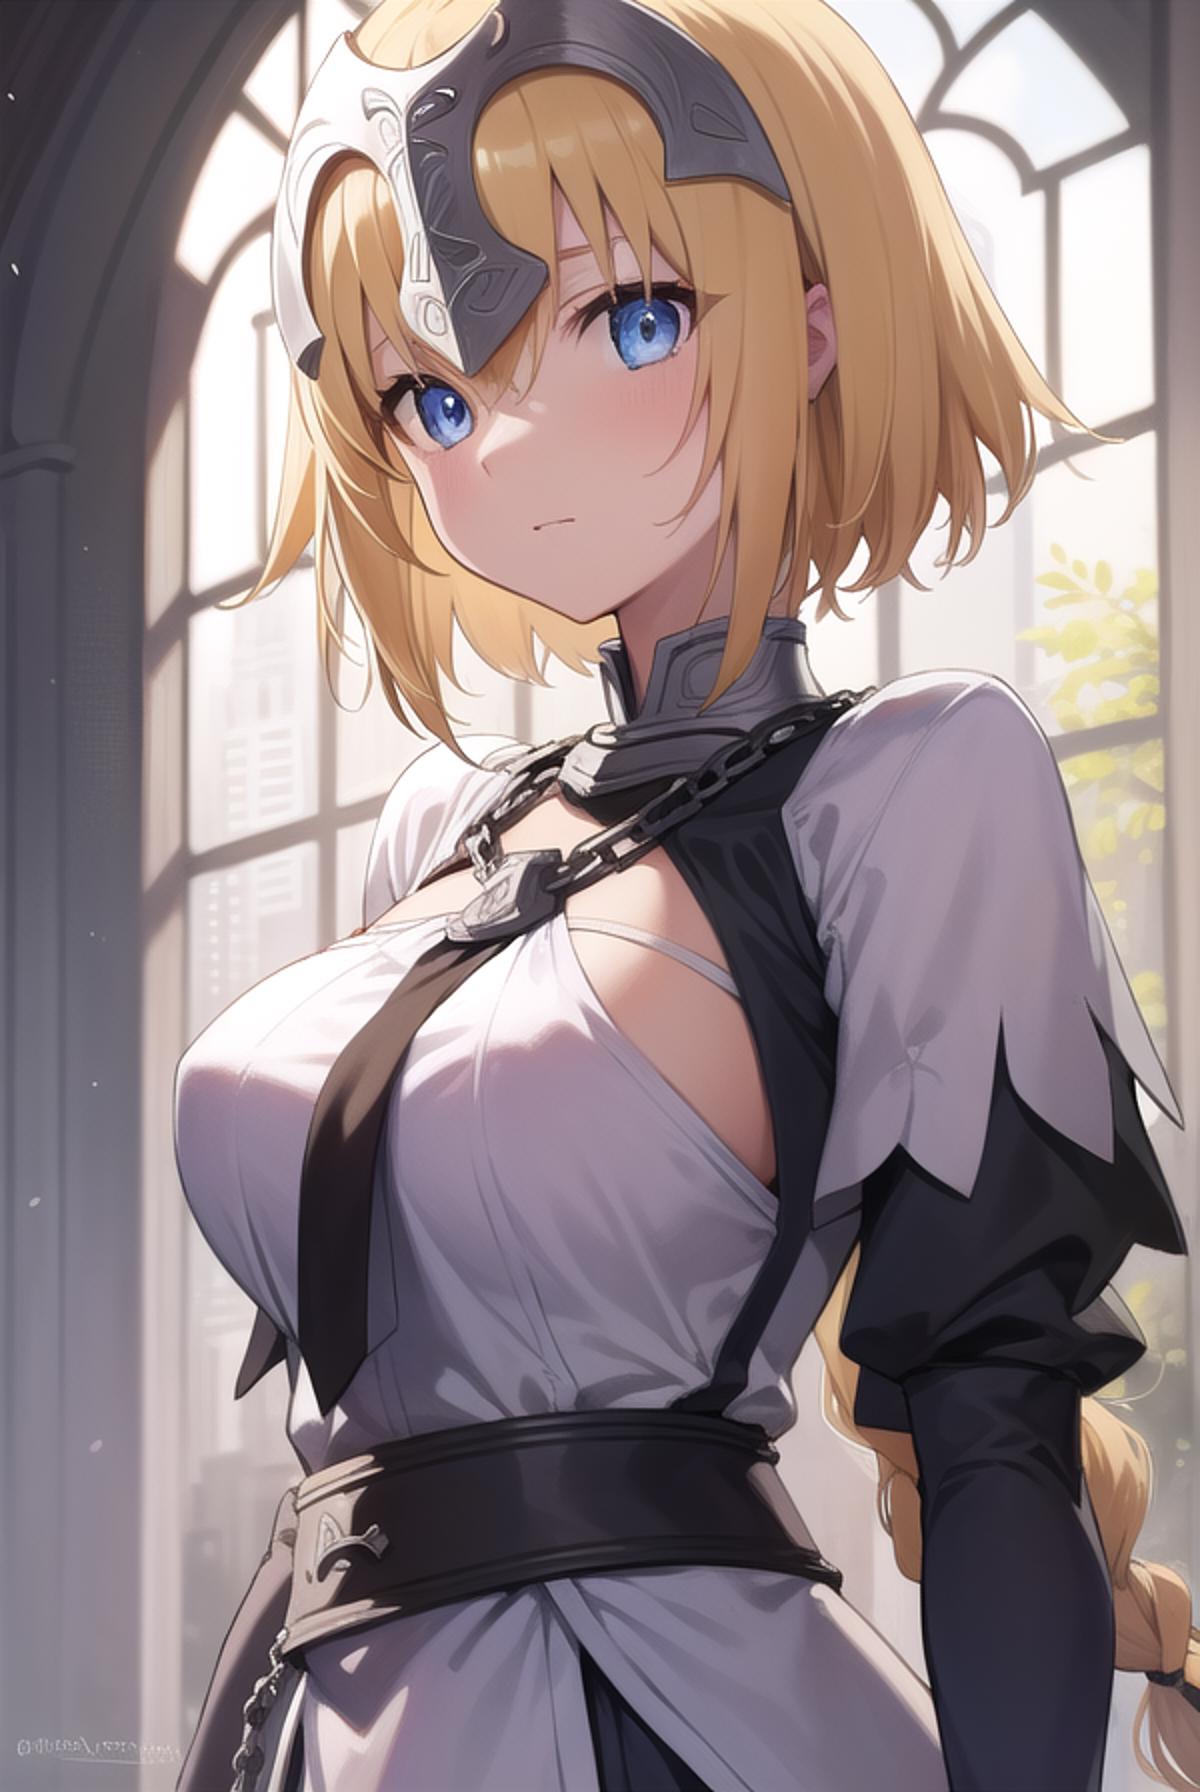 Jeanne D'Arc (ジャンヌ・ダルク) - Fate Grand Order - v1.0 | Stable 